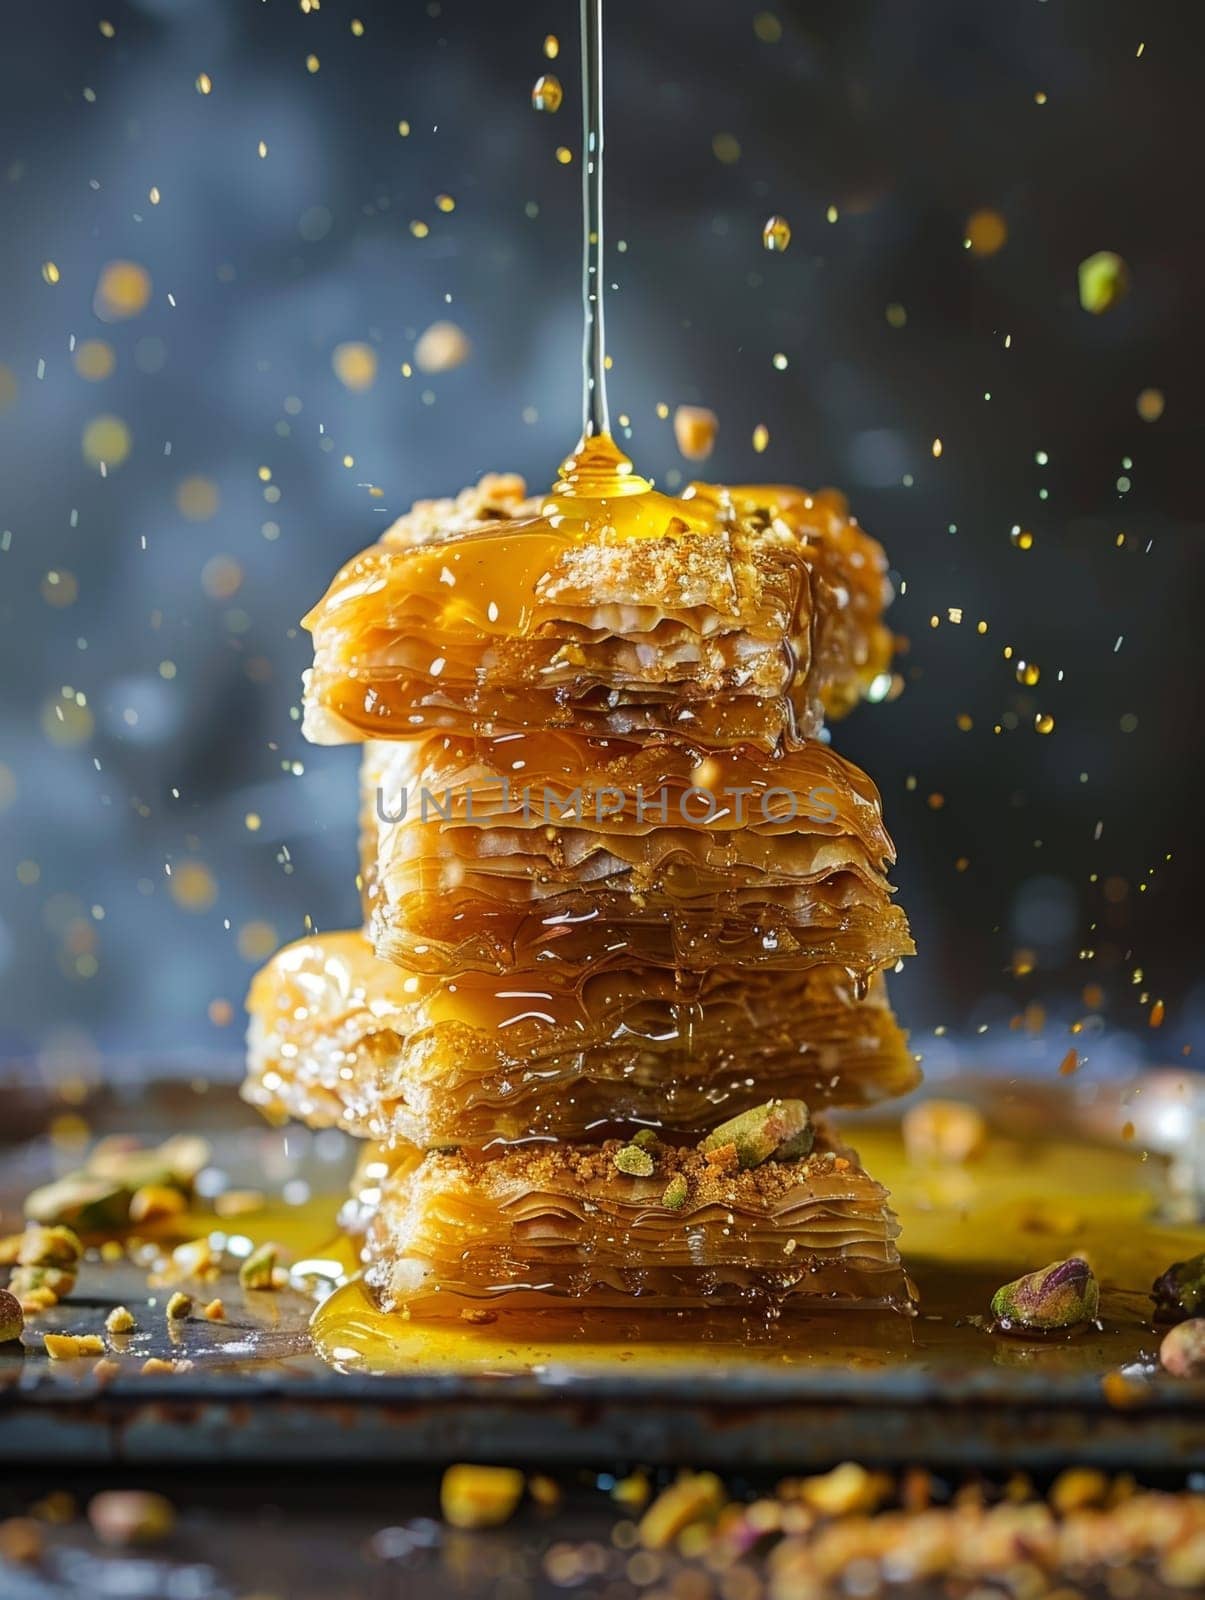 Towering Turkish baklava, with its delicate phyllo dough layers, drizzled in sweet honey and sprinkled with crunchy crushed pistachios - a decadent and authentic Middle Eastern dessert. by sfinks